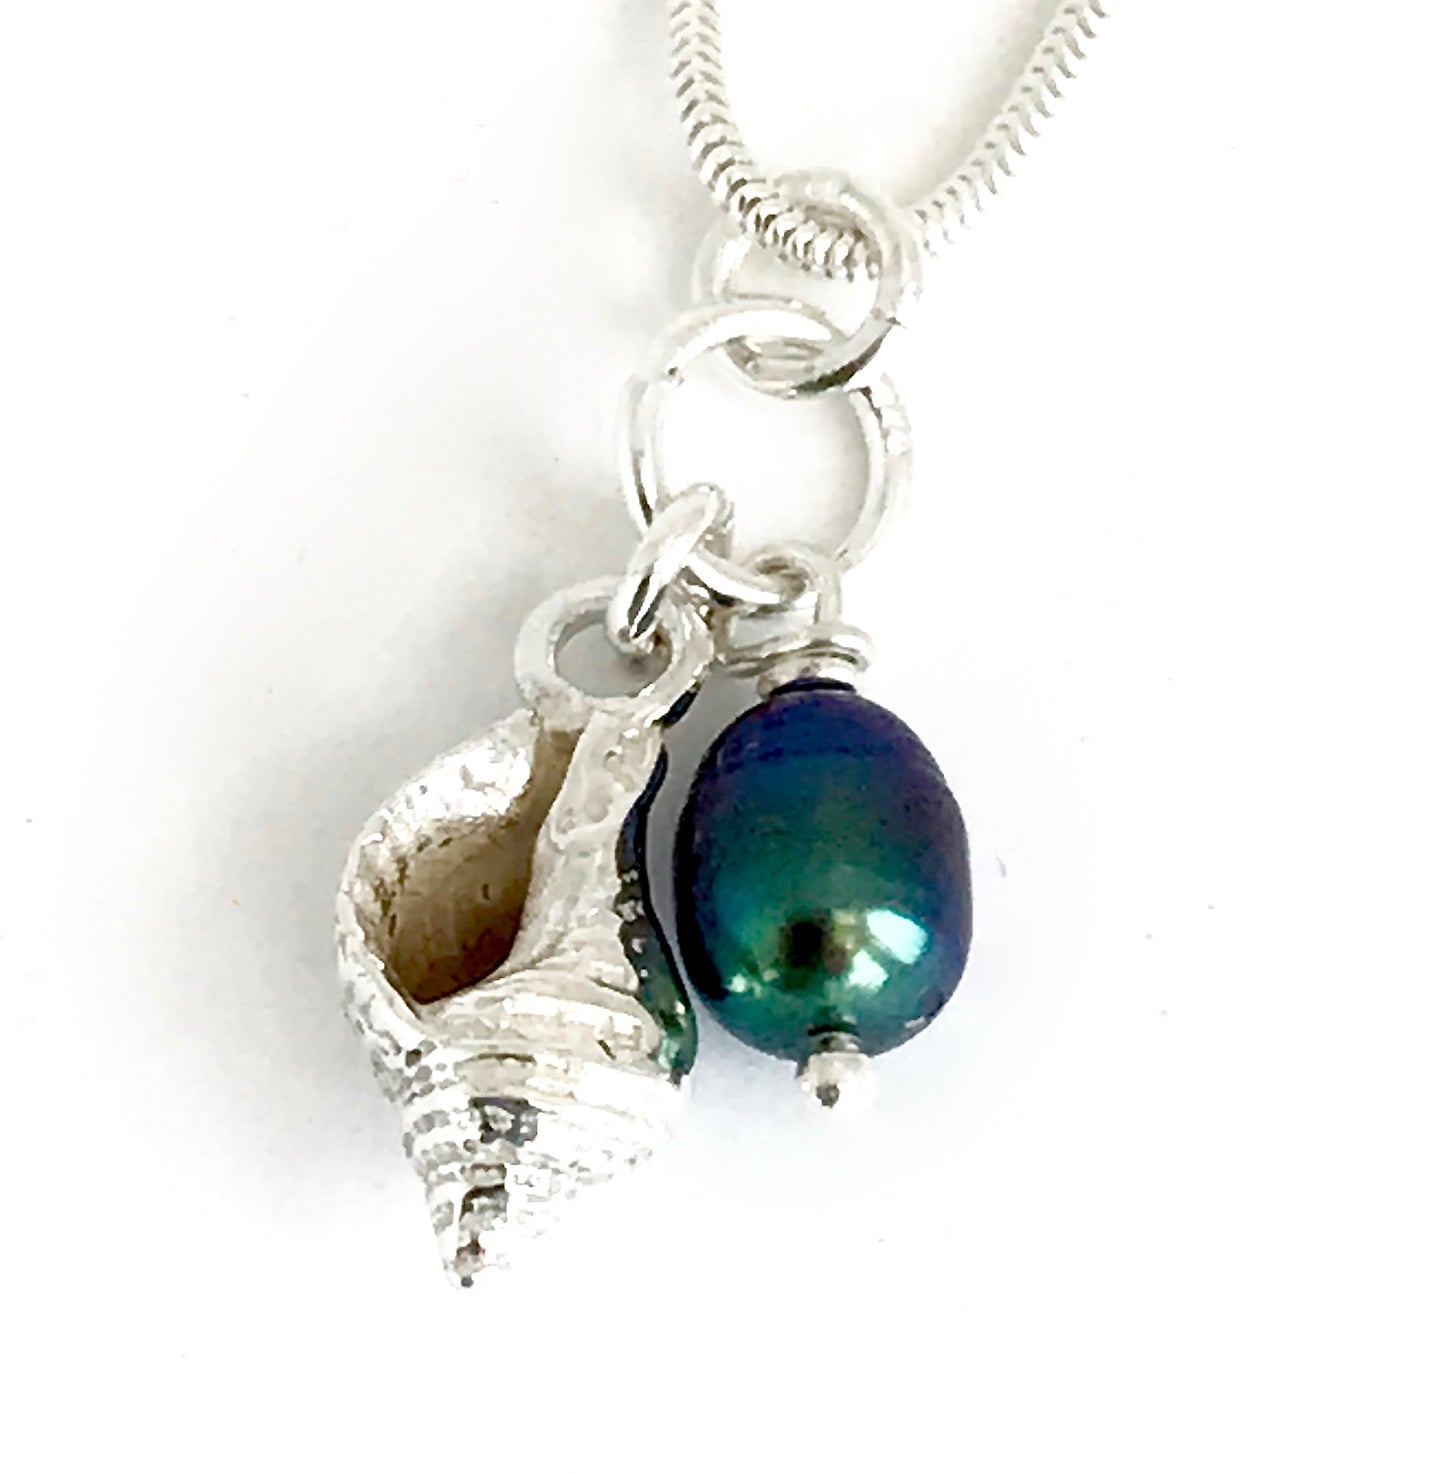 Whelk shell necklace with black/blue  pearl